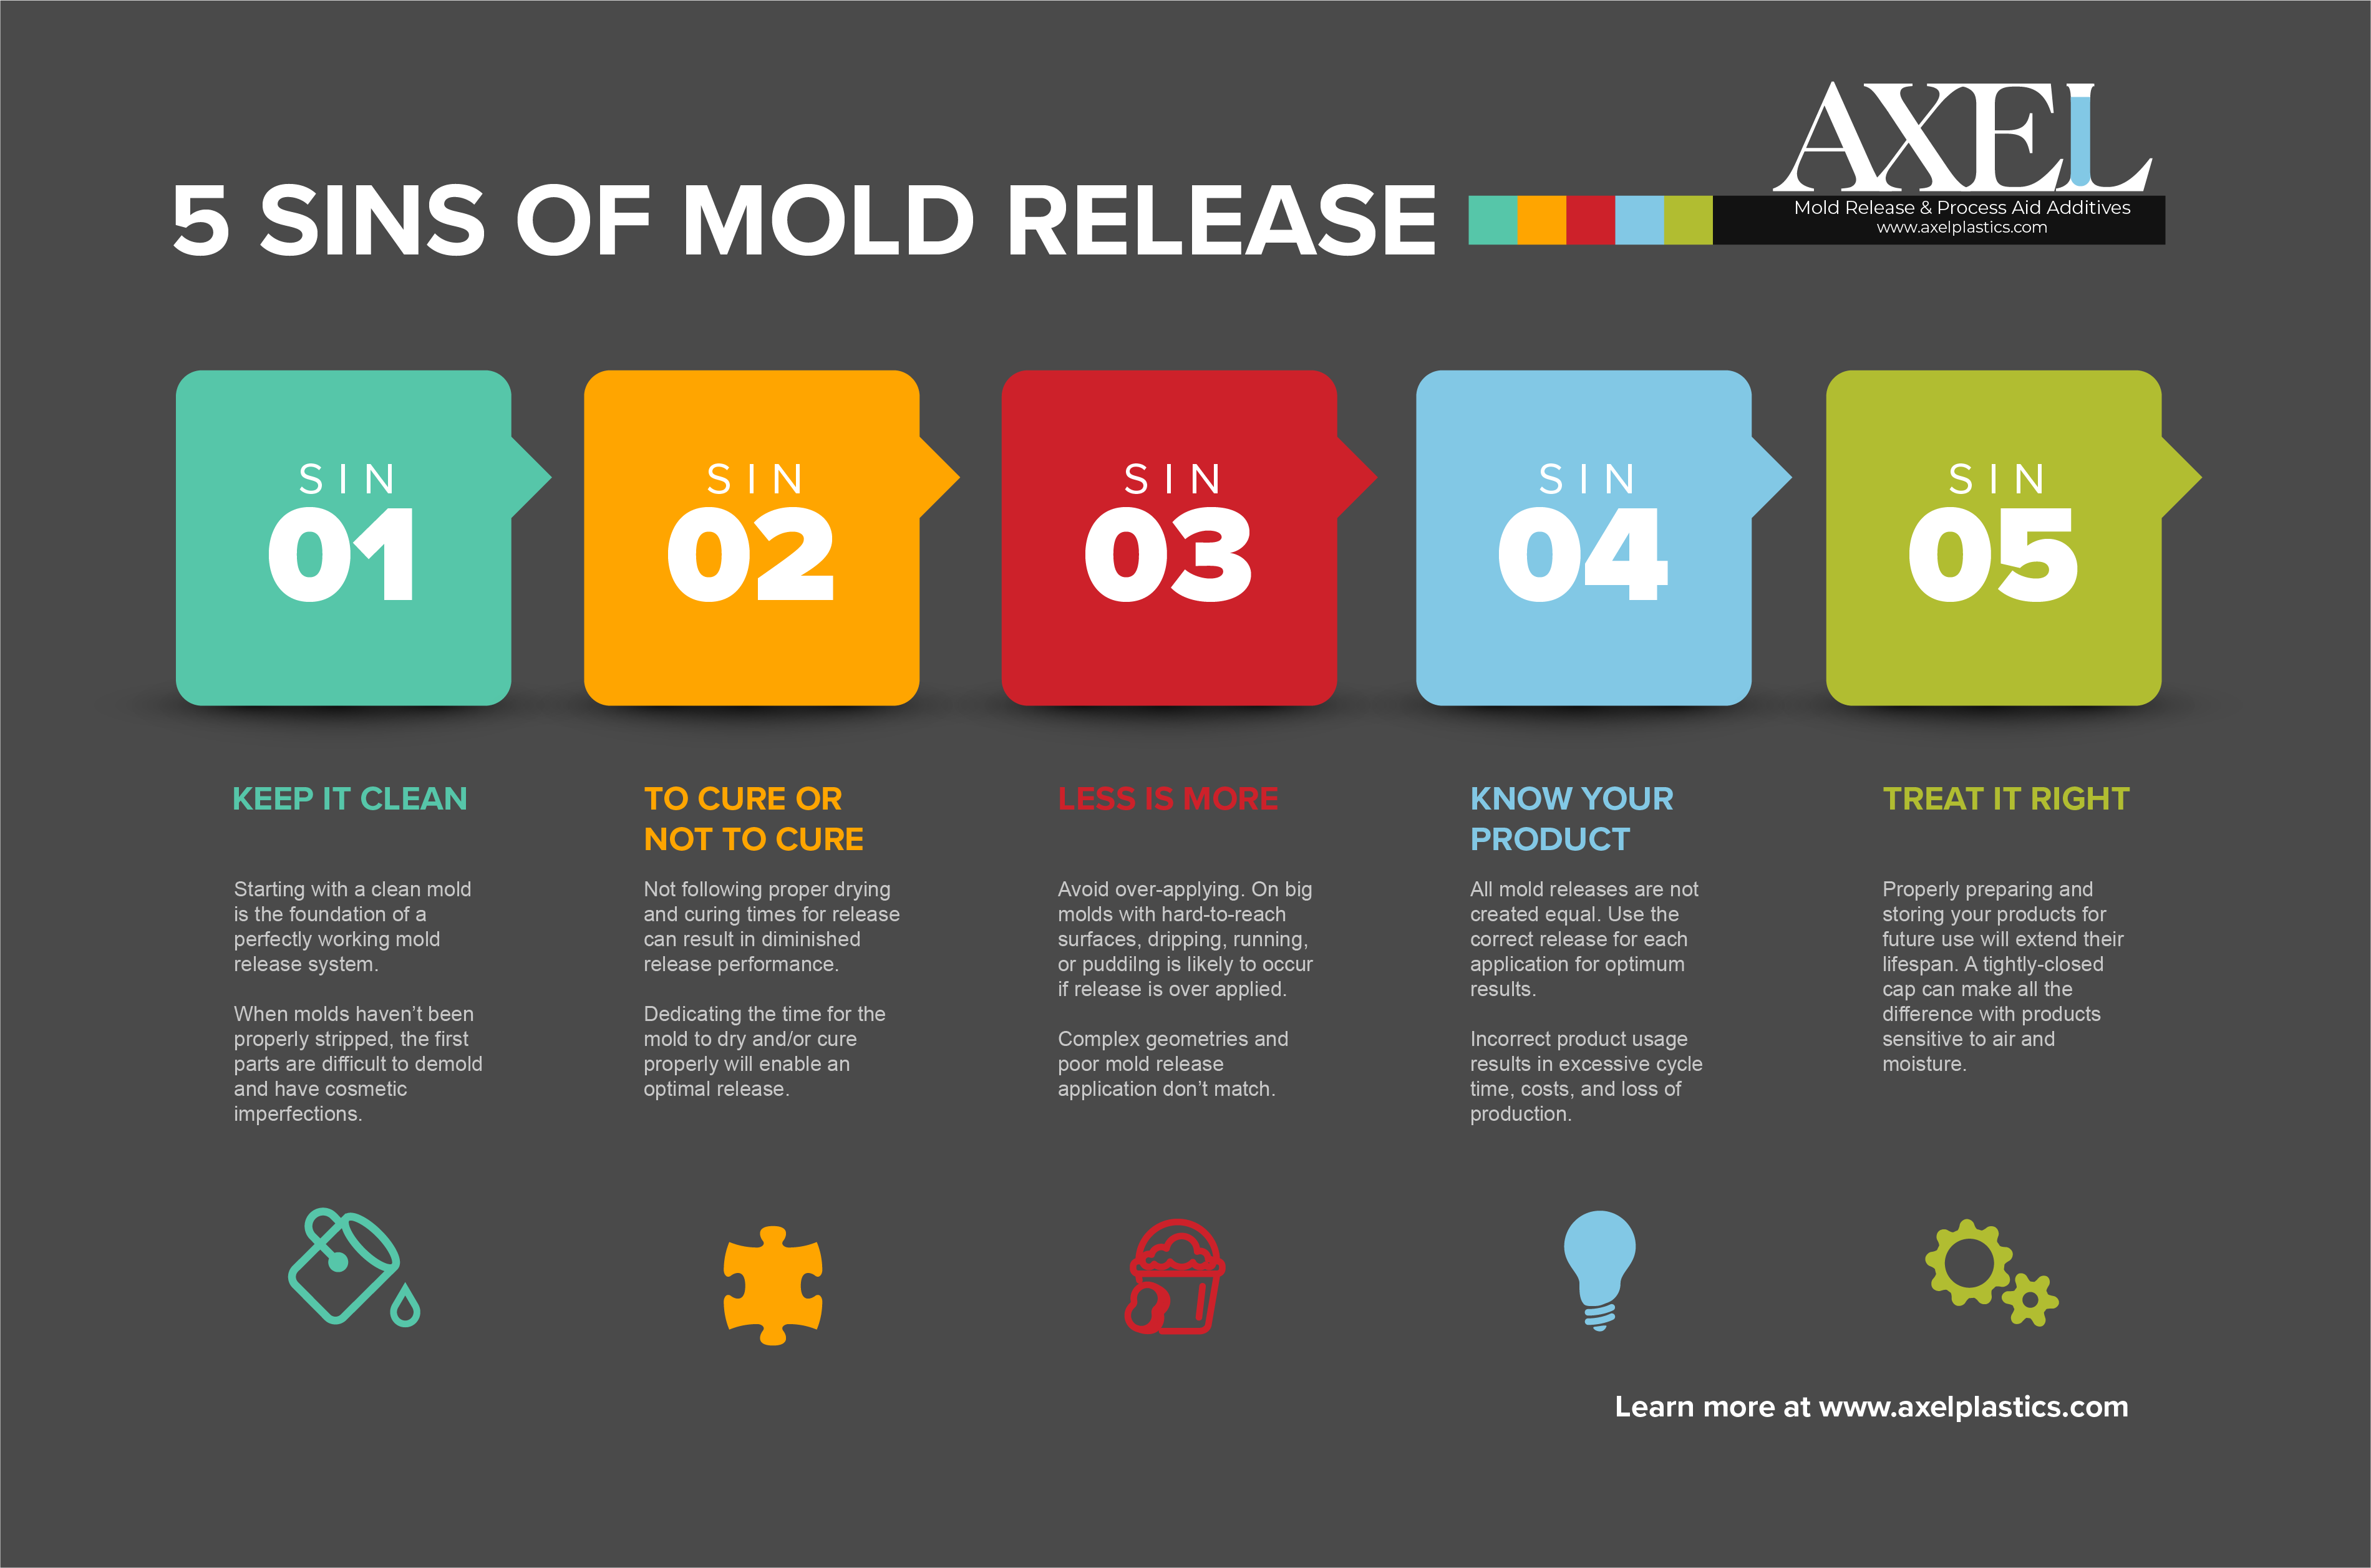 5 Sins of Mold Release